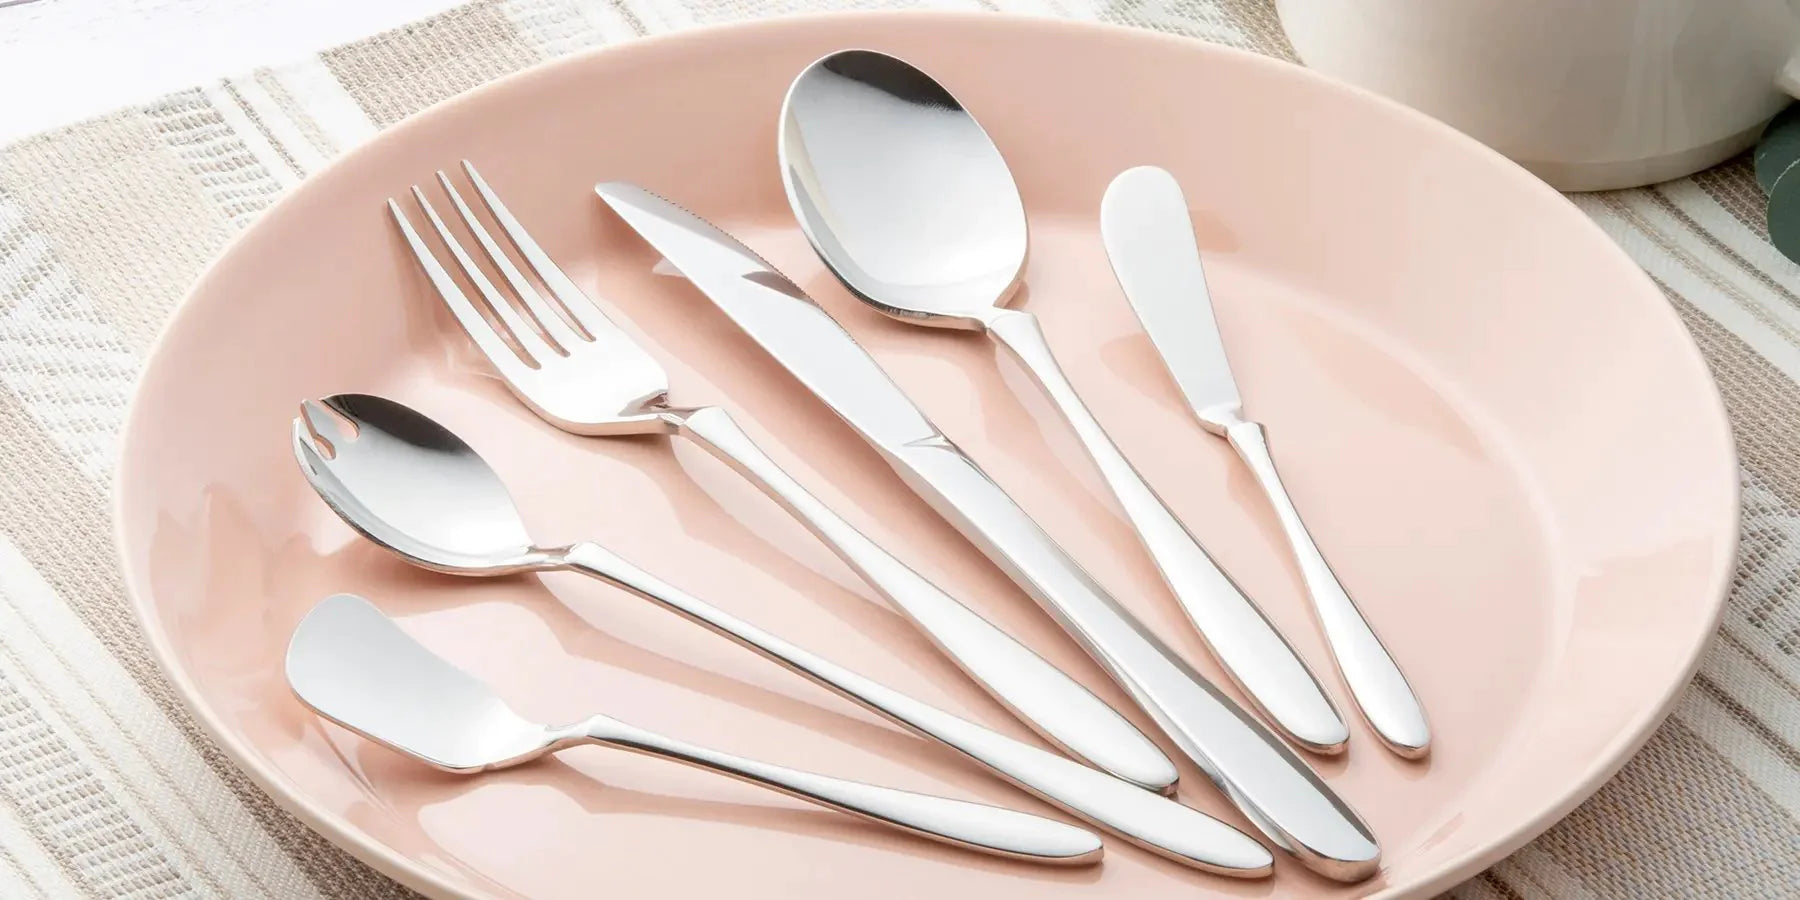 Discover our great selection of Forks at Globalkitchen Japan.